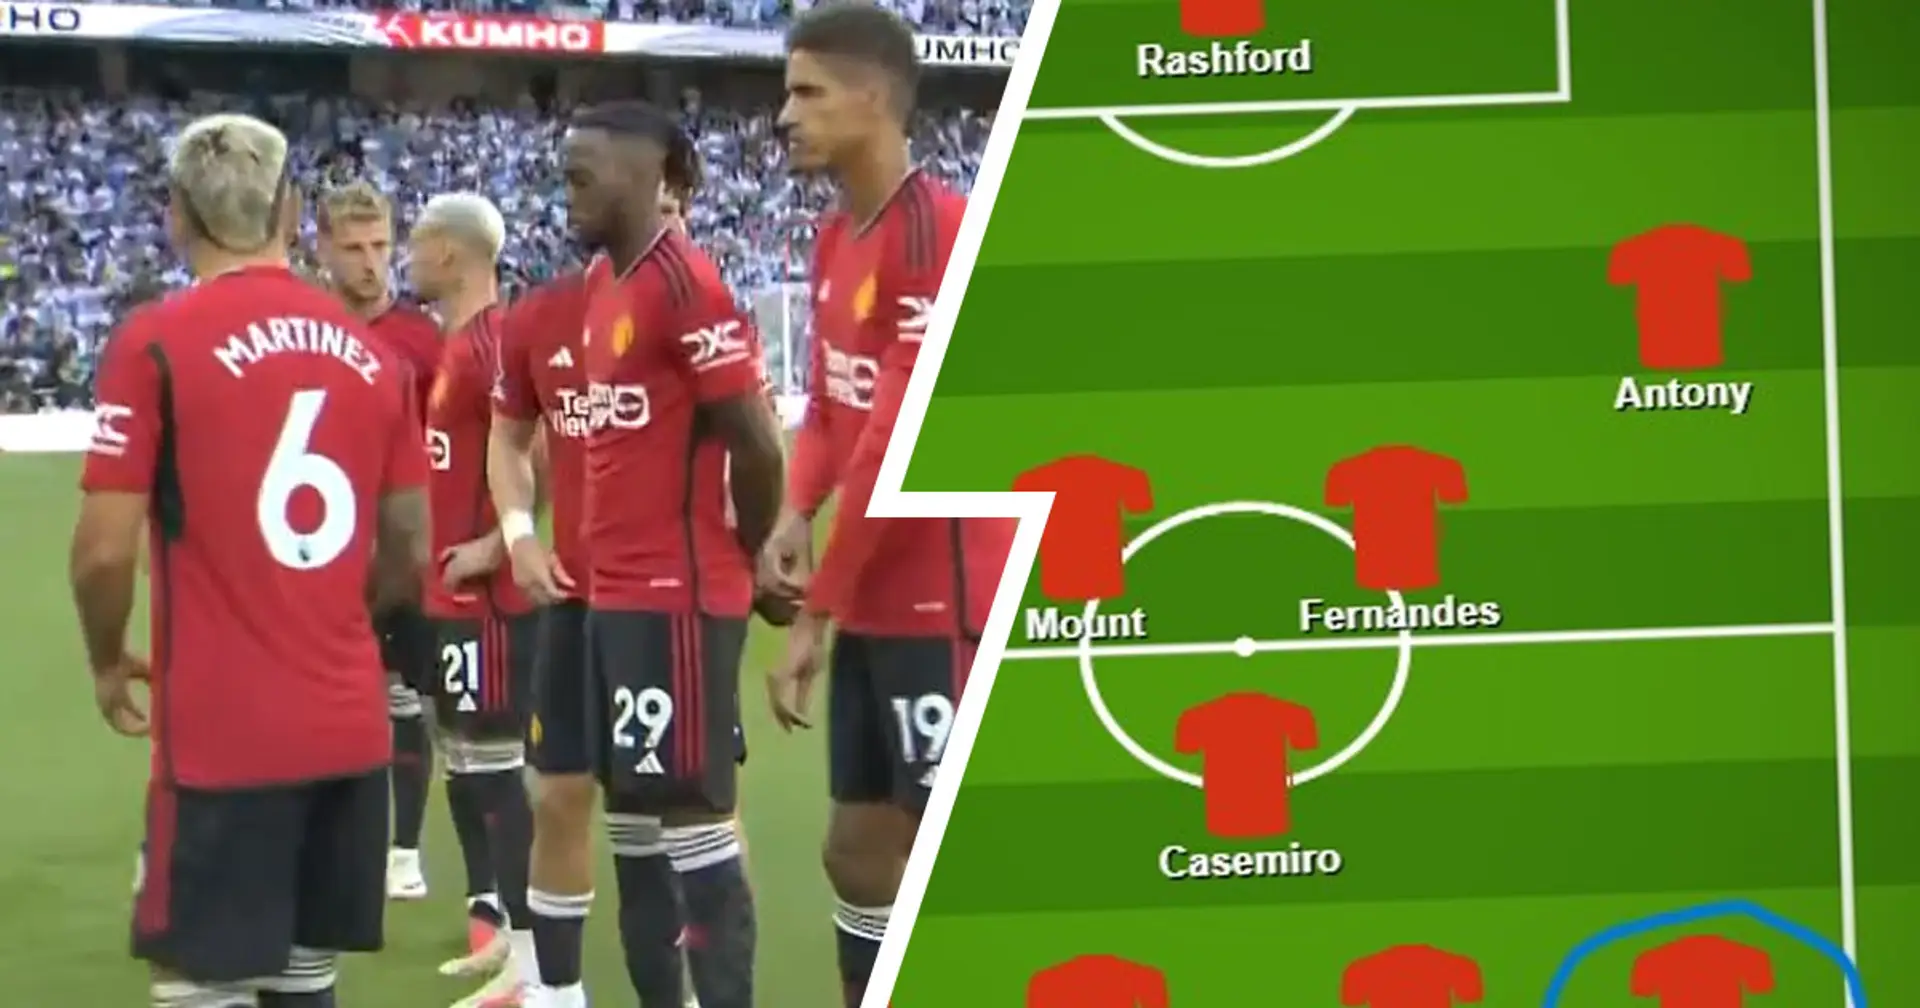 Man United's biggest positives from Spurs defeat - shown in lineup